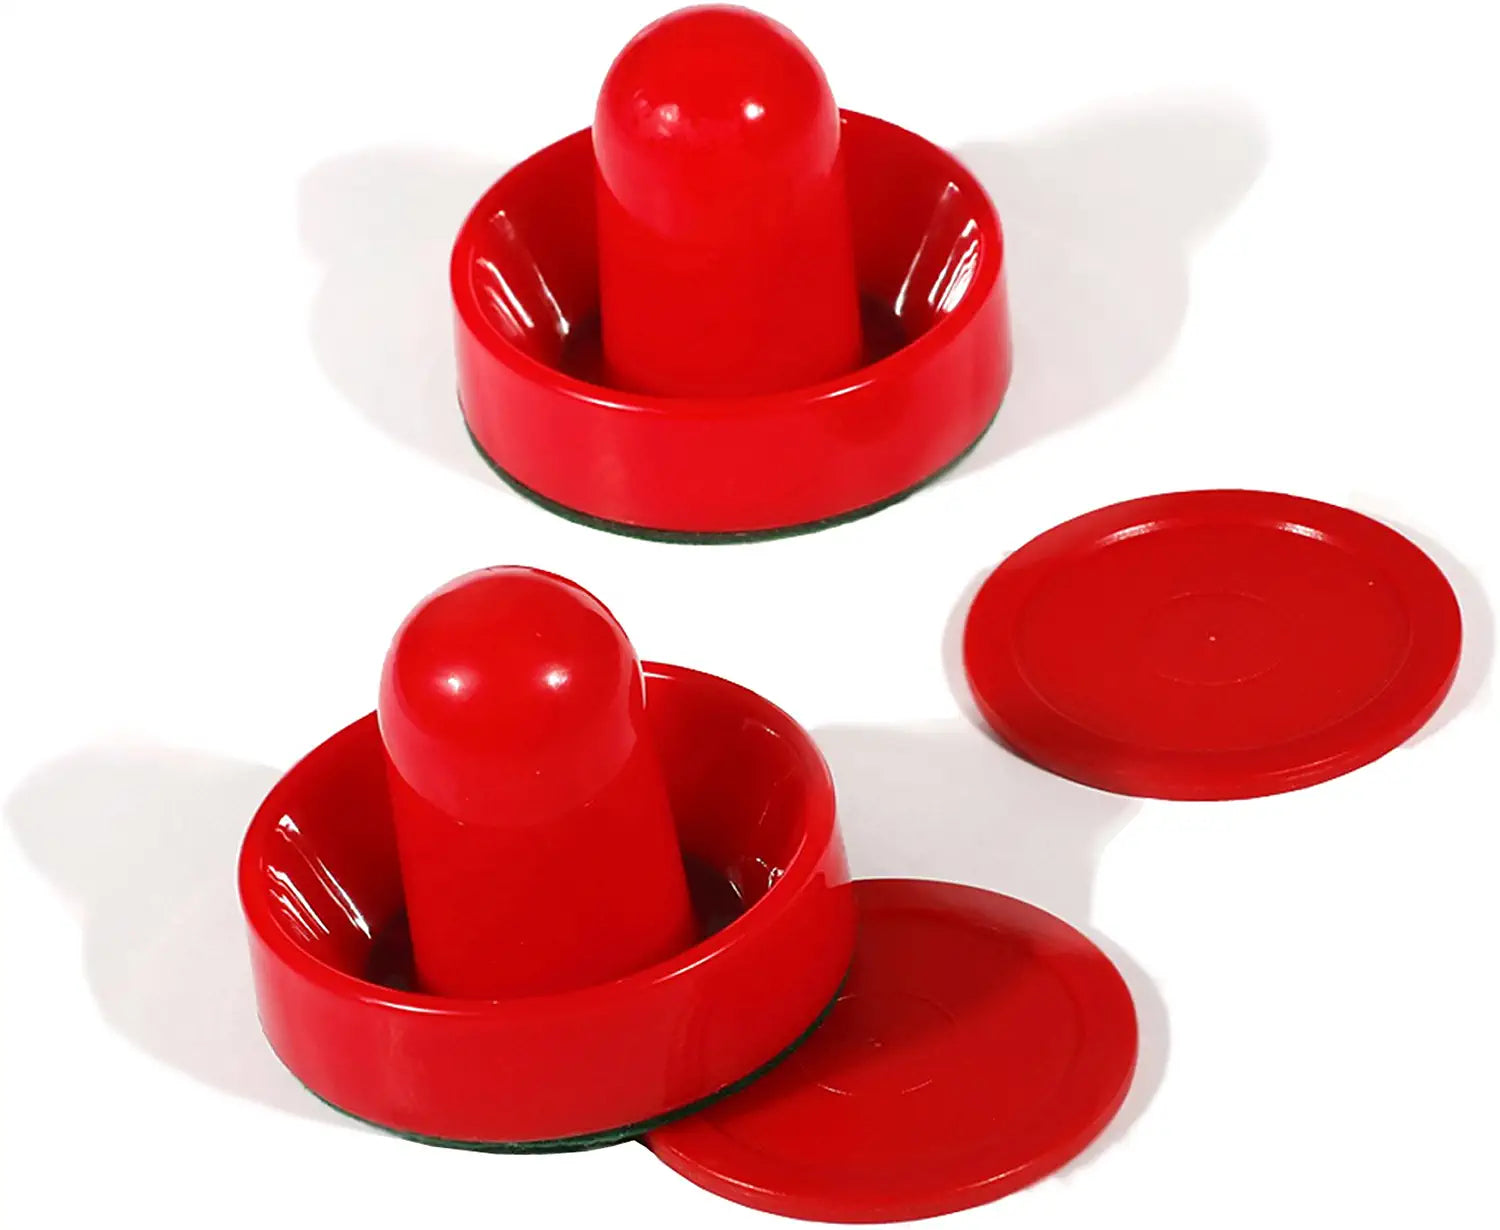 Hathaway 3-Inch Striker and 2.5-Inch Puck Air Hockey Set, Red